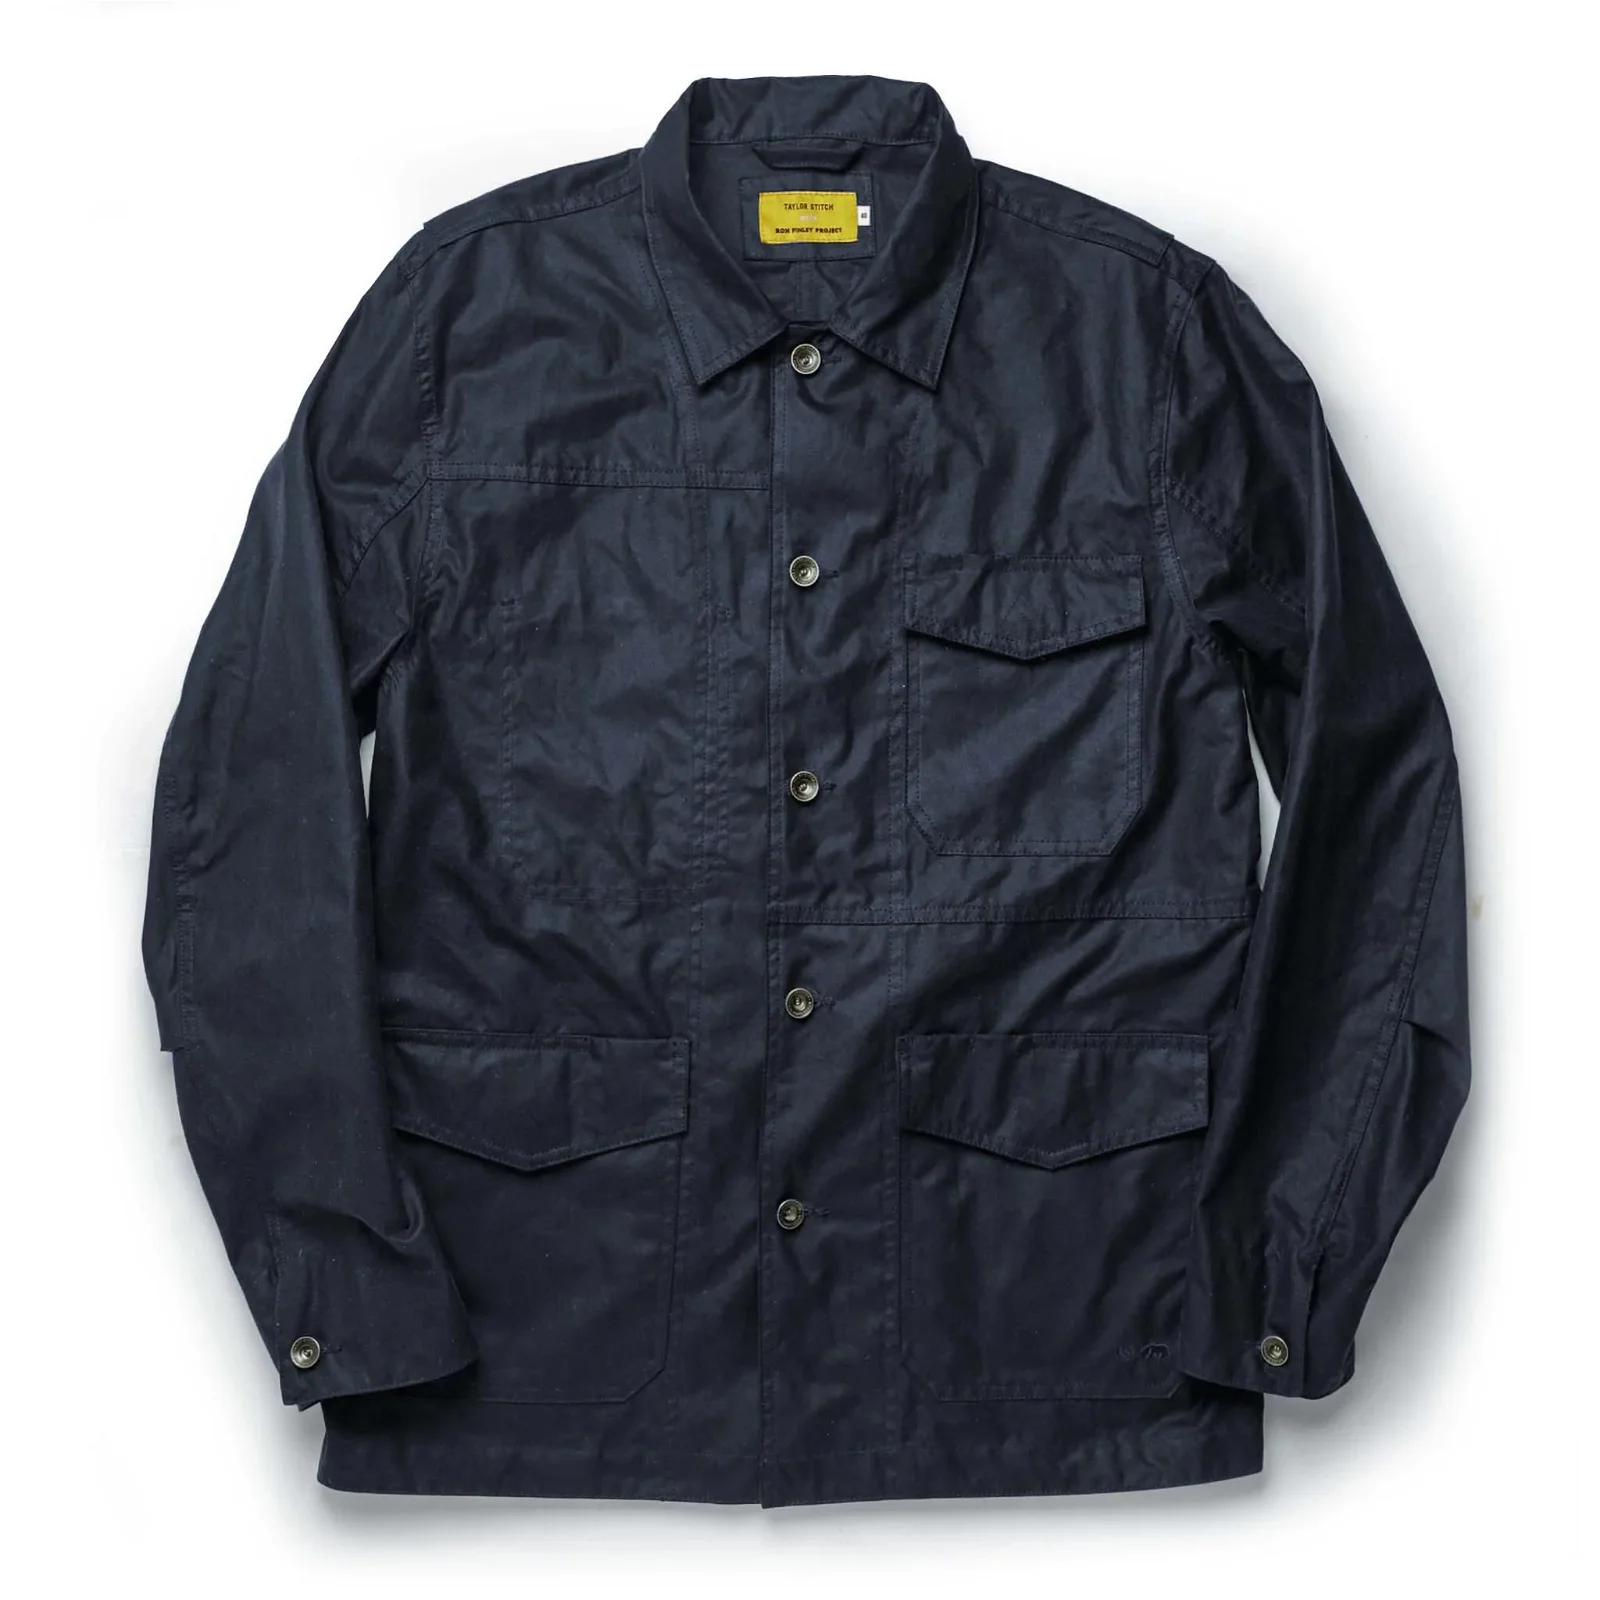 Image of The Task Jacket in Waxed Navy